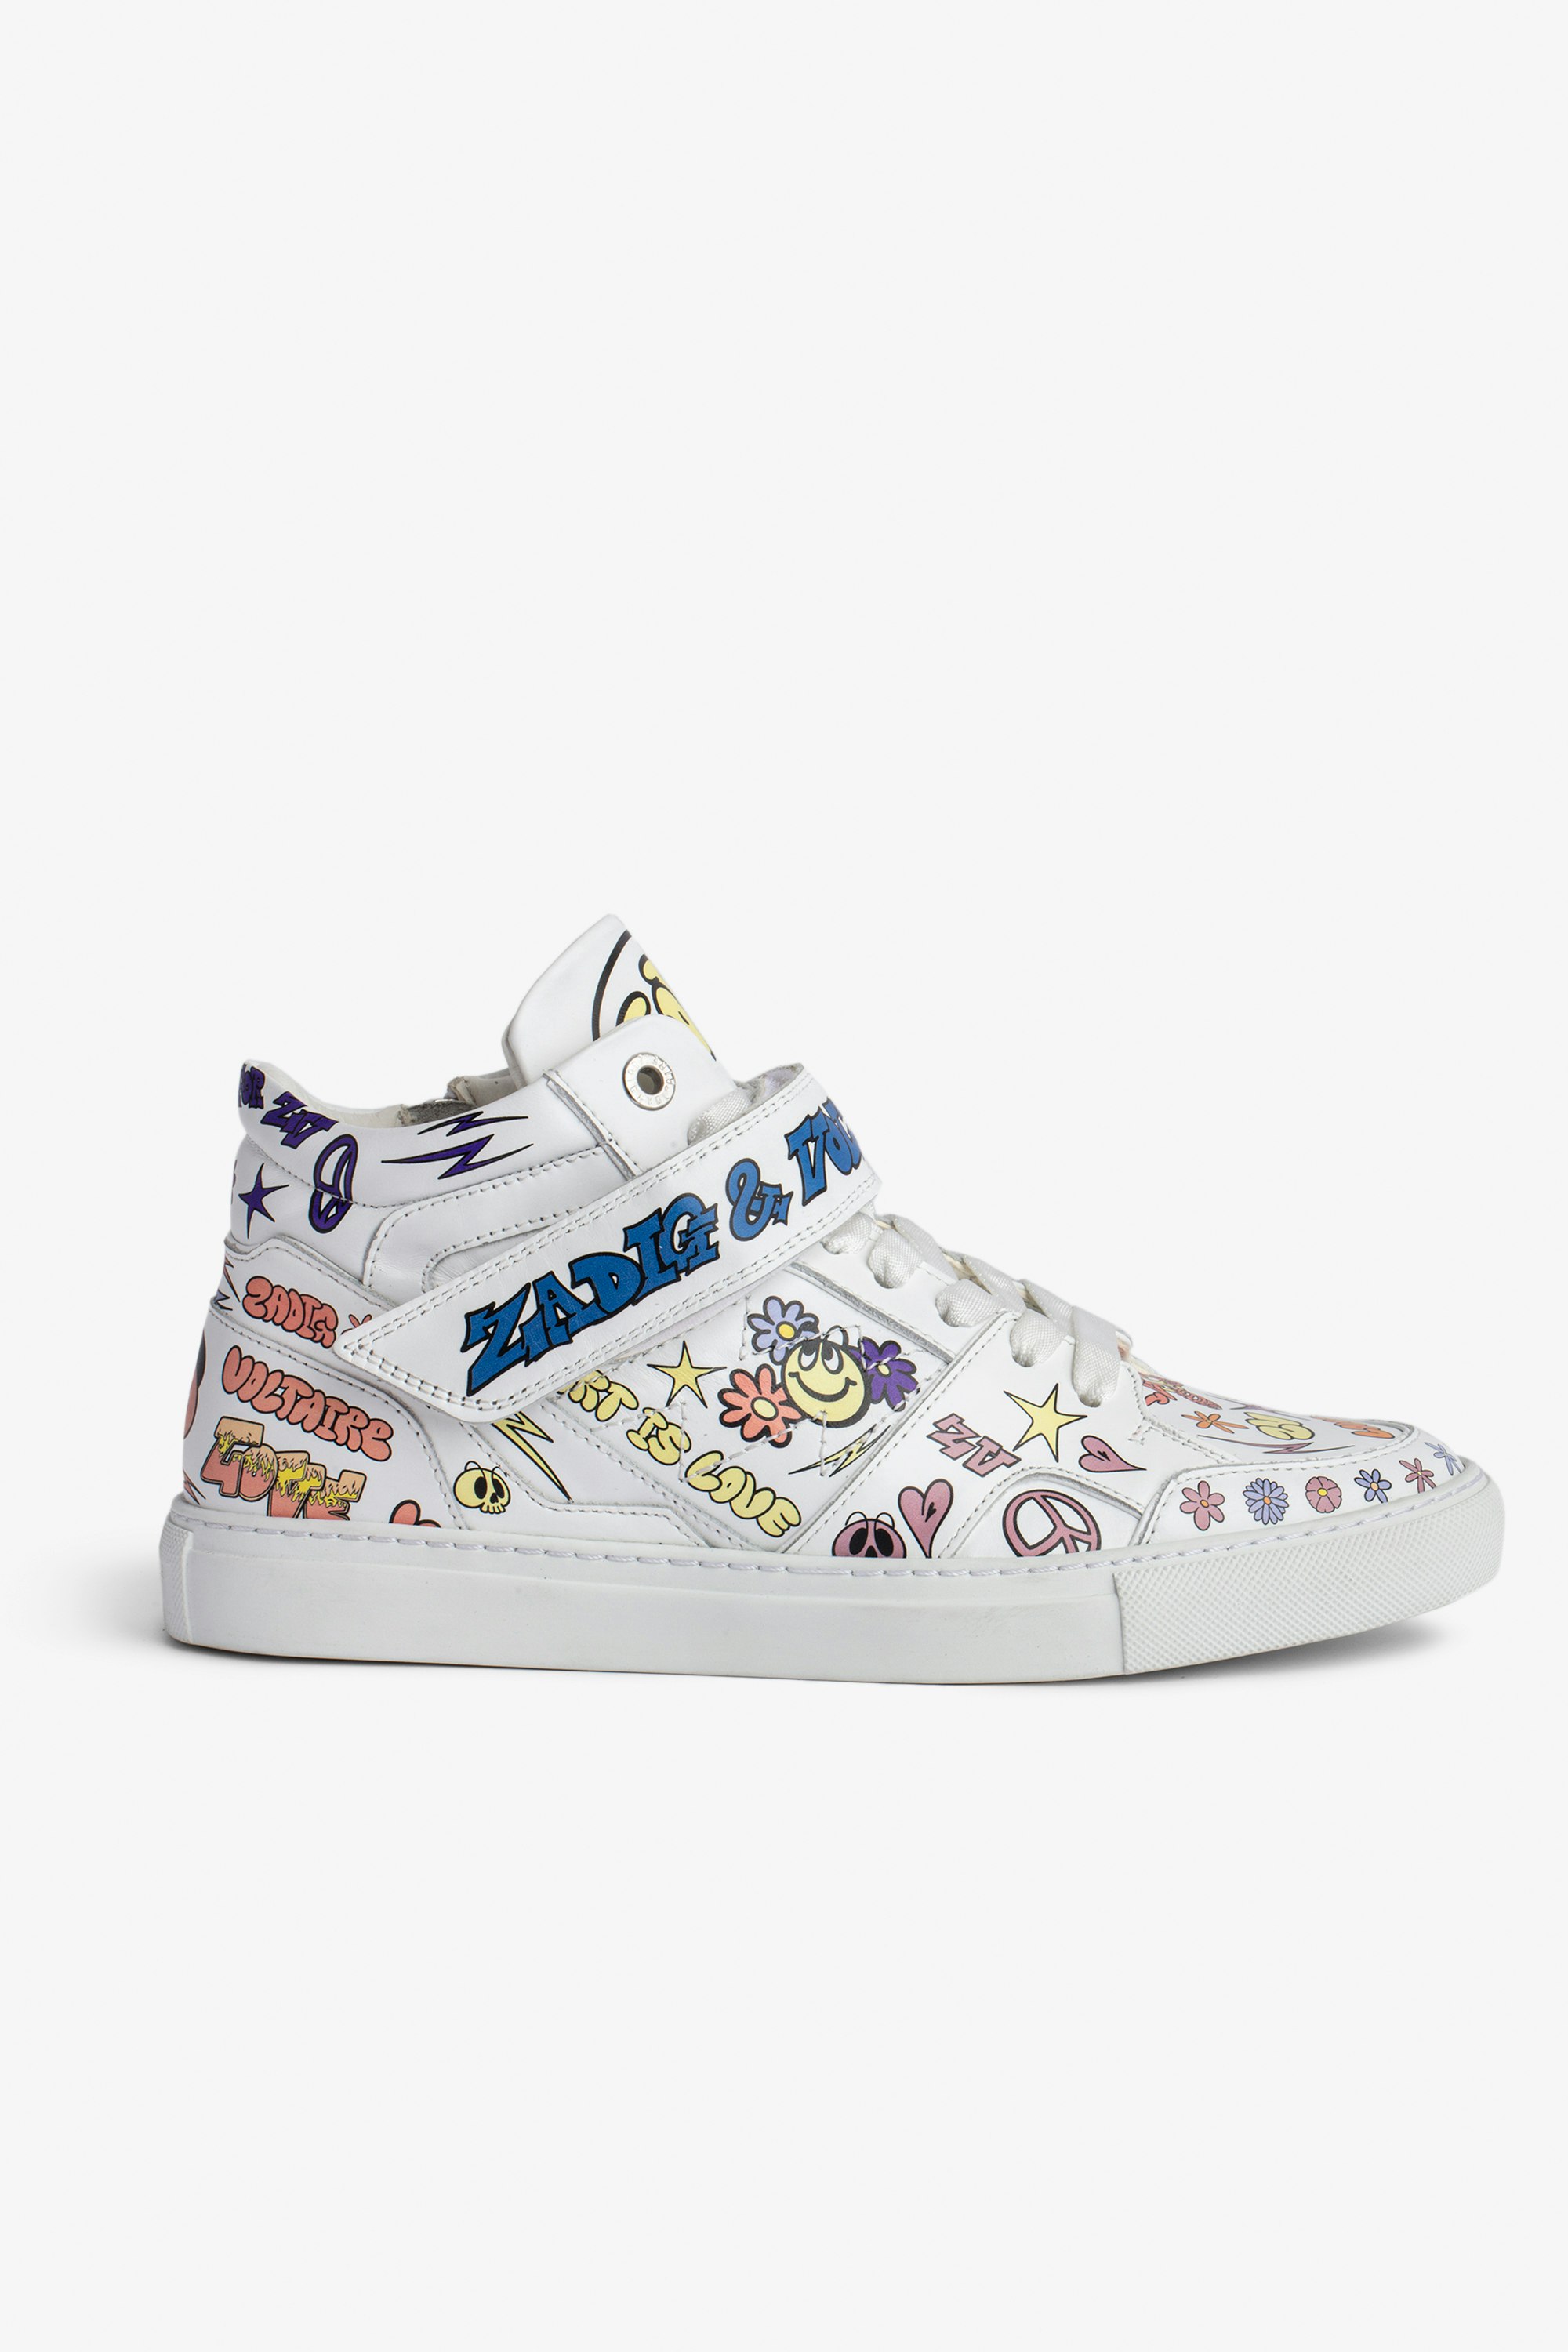 ZV1747 Mid Flash trainers Women's mid-top trainers in white leather and featuring Core Cho motifs